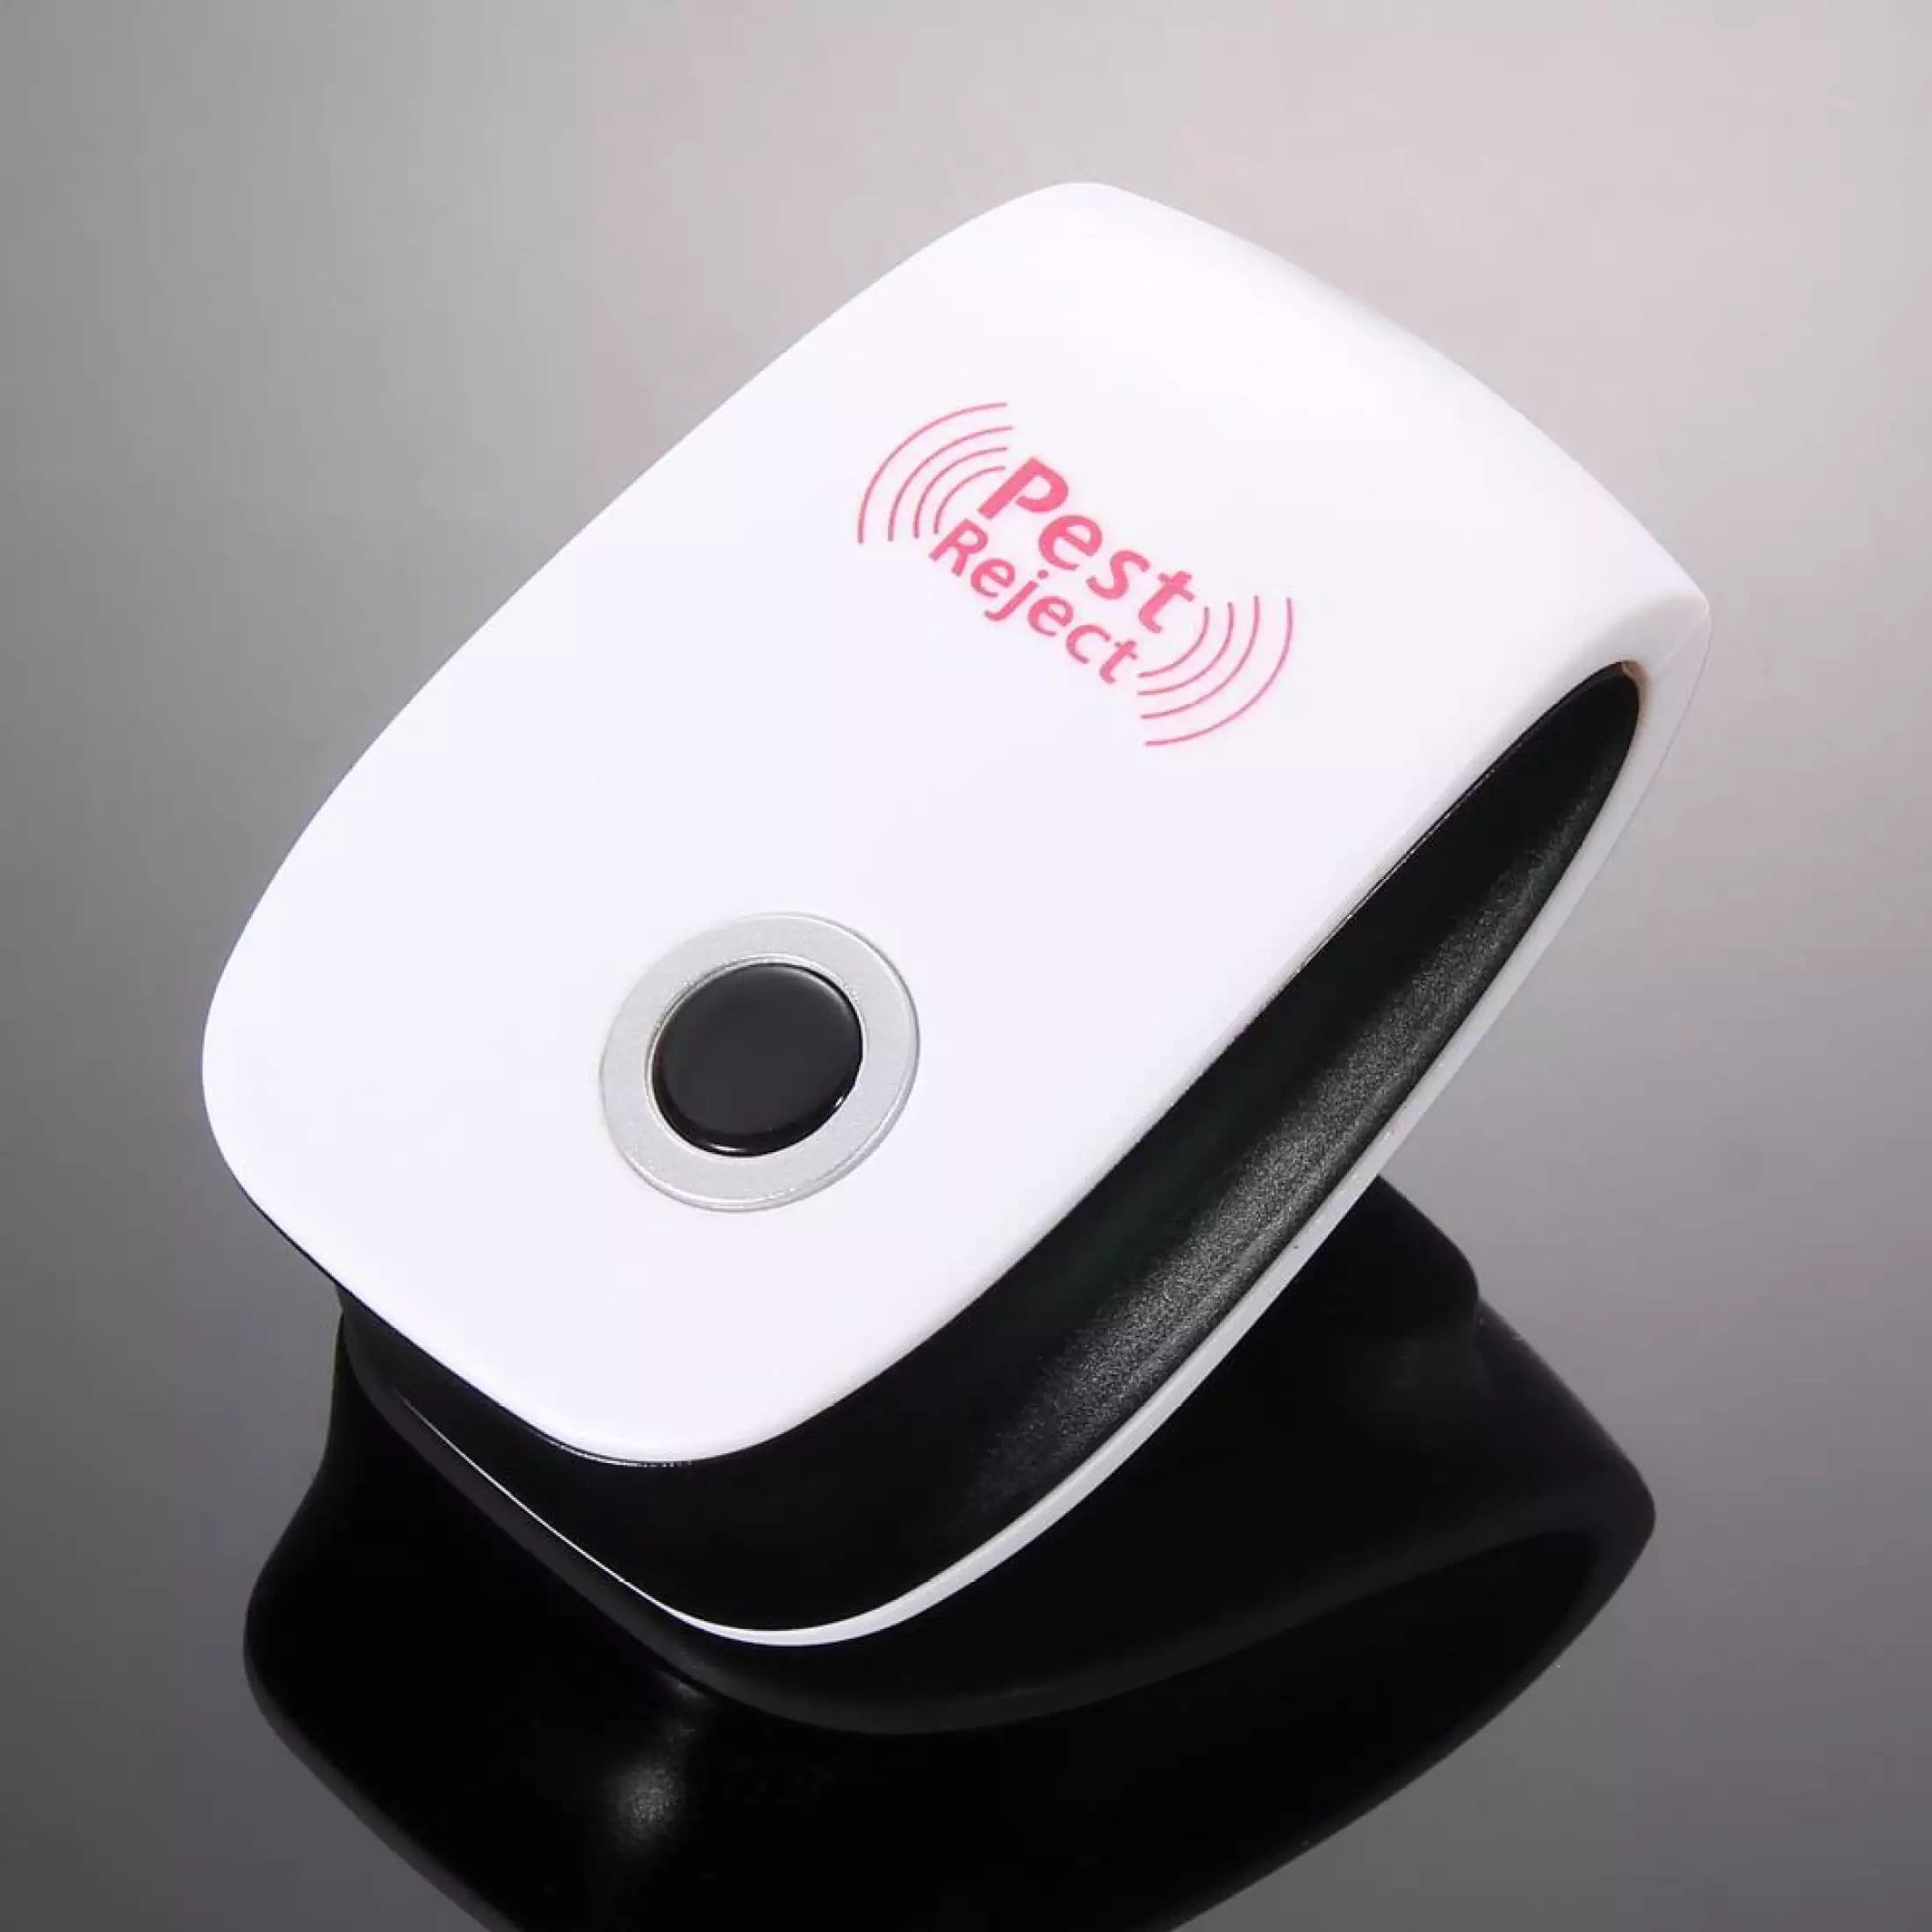 Ultrasonic Pest Repeller for Mosquito, Cockroaches, etc (Pack of 1) Roposo Clout